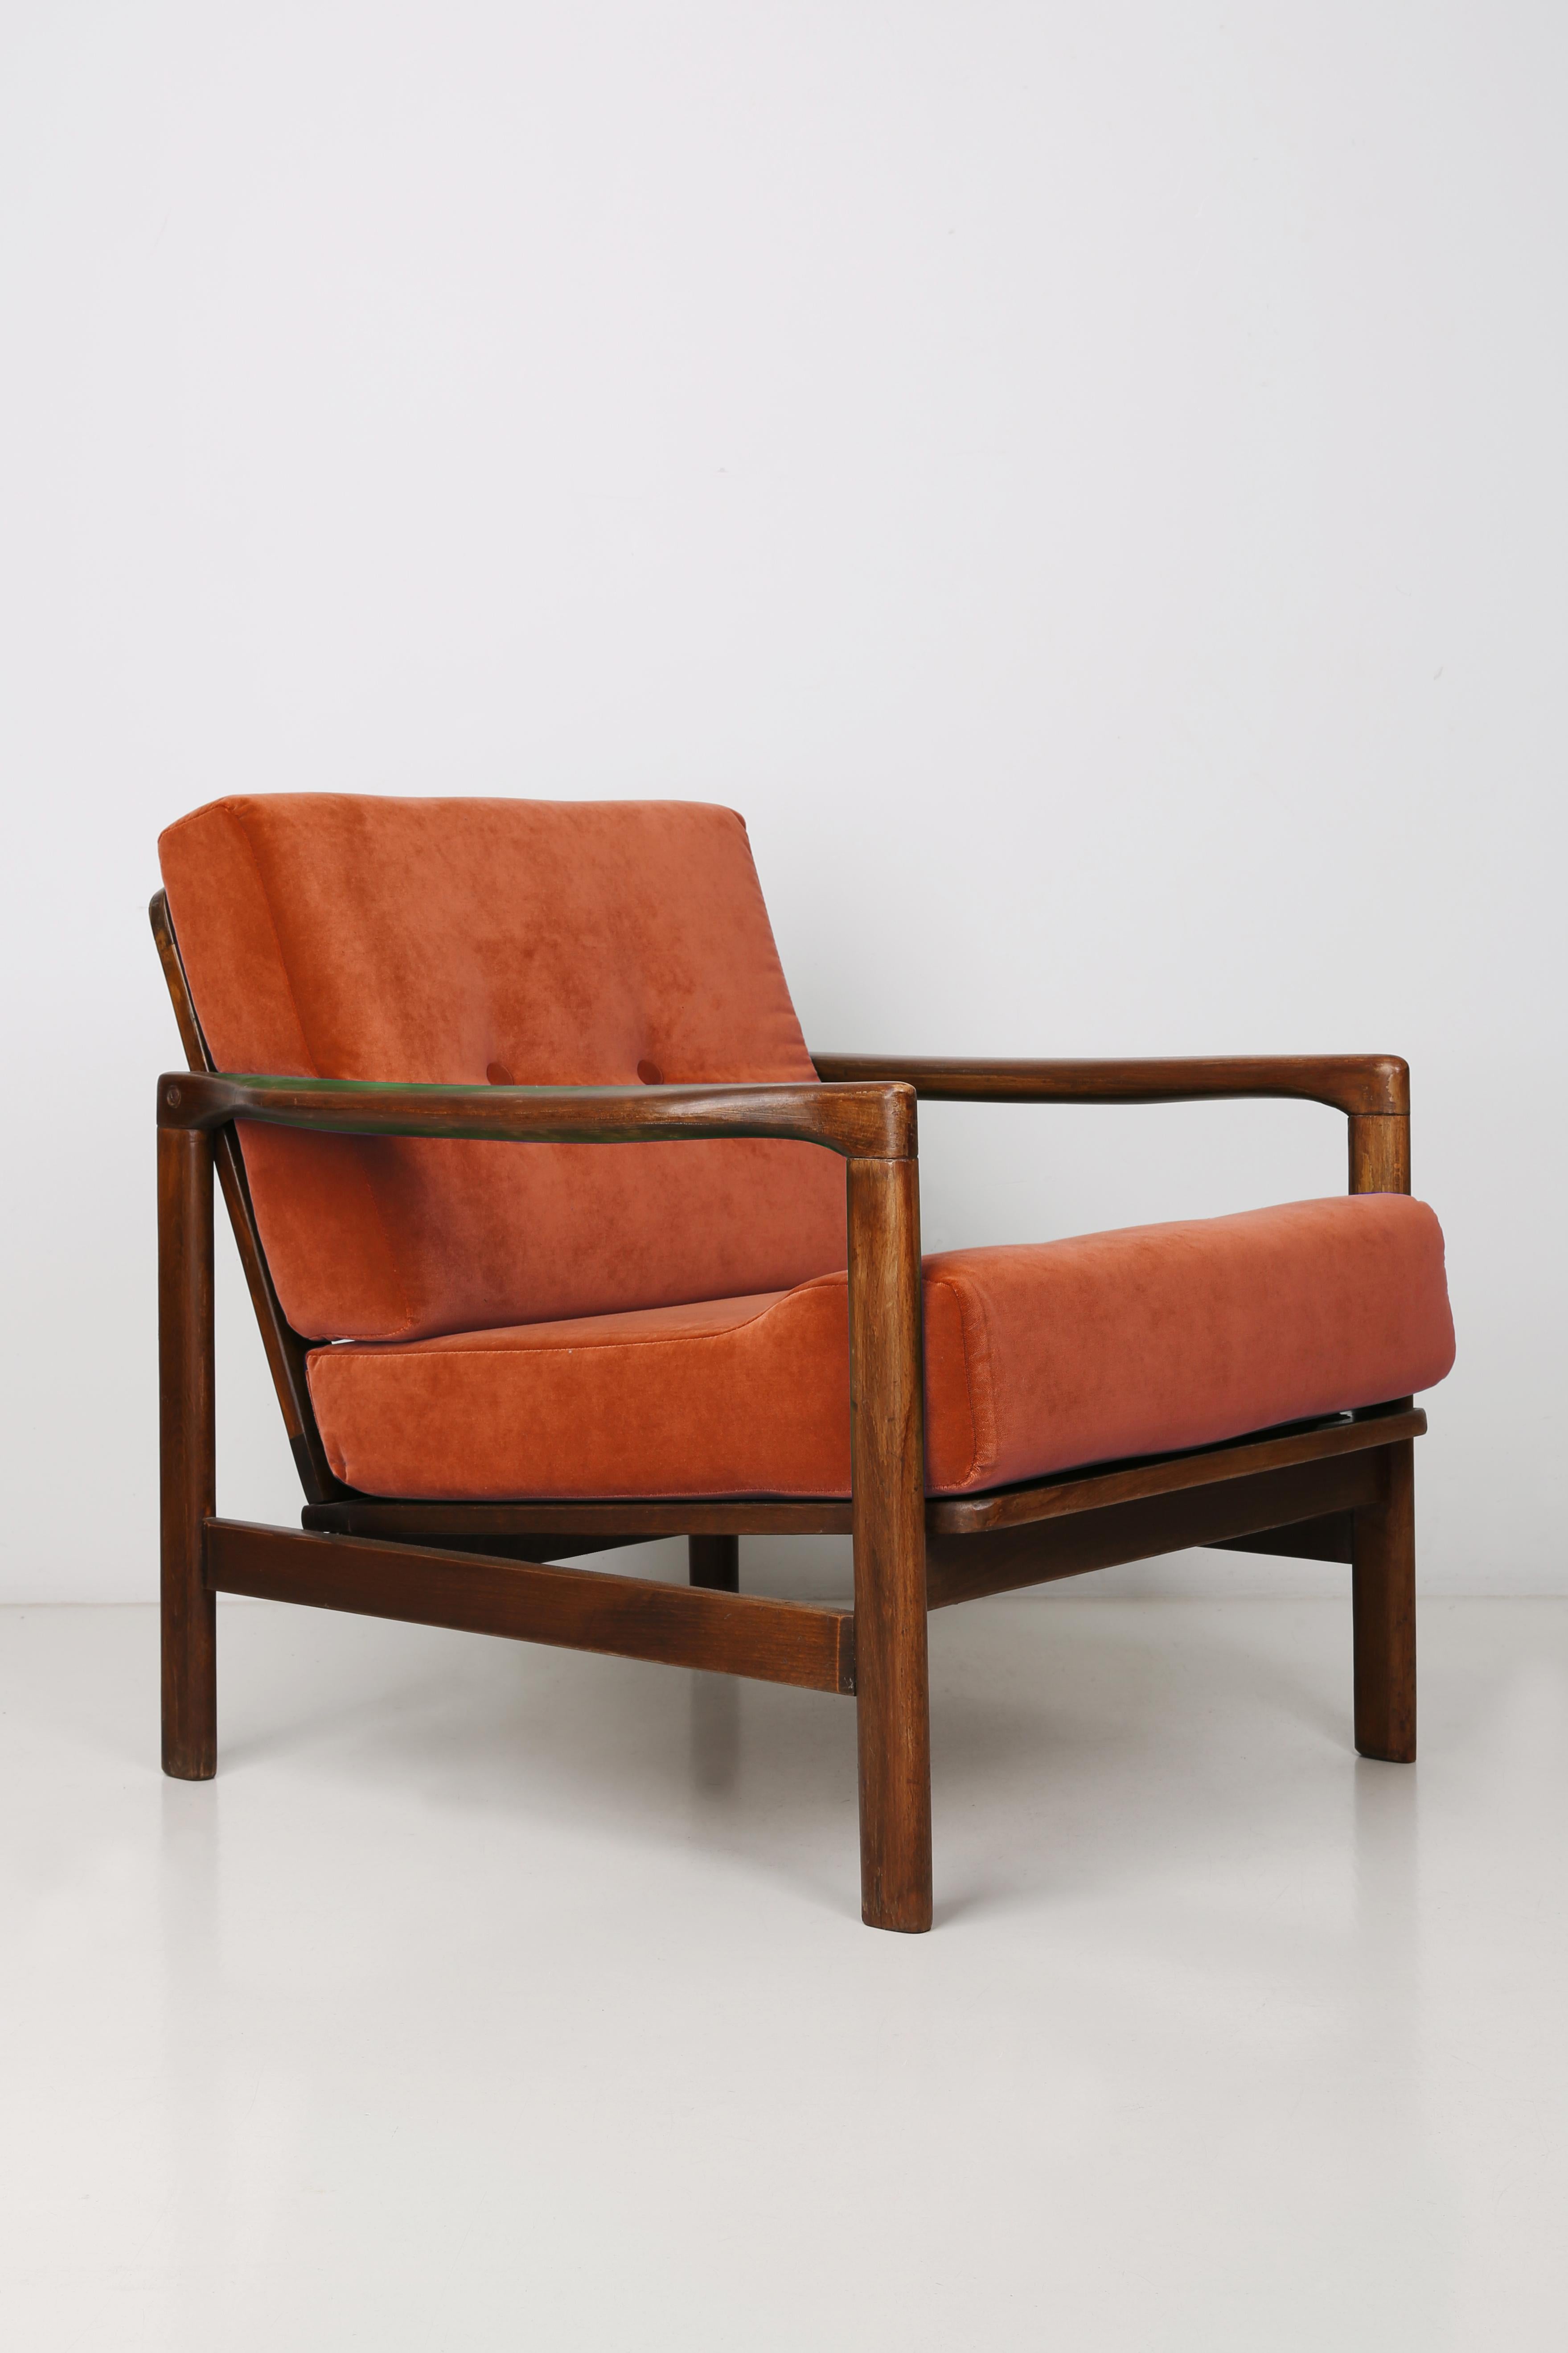 The B-7522 armchairs was designed in the 1960s by Zenon Baczyk, it was produced by Swarzedz Furniture Factories in Poland. Furniture kept in perfect condition, after full upholstery and wood renovation. Stabile and very comfortable armchair, dressed